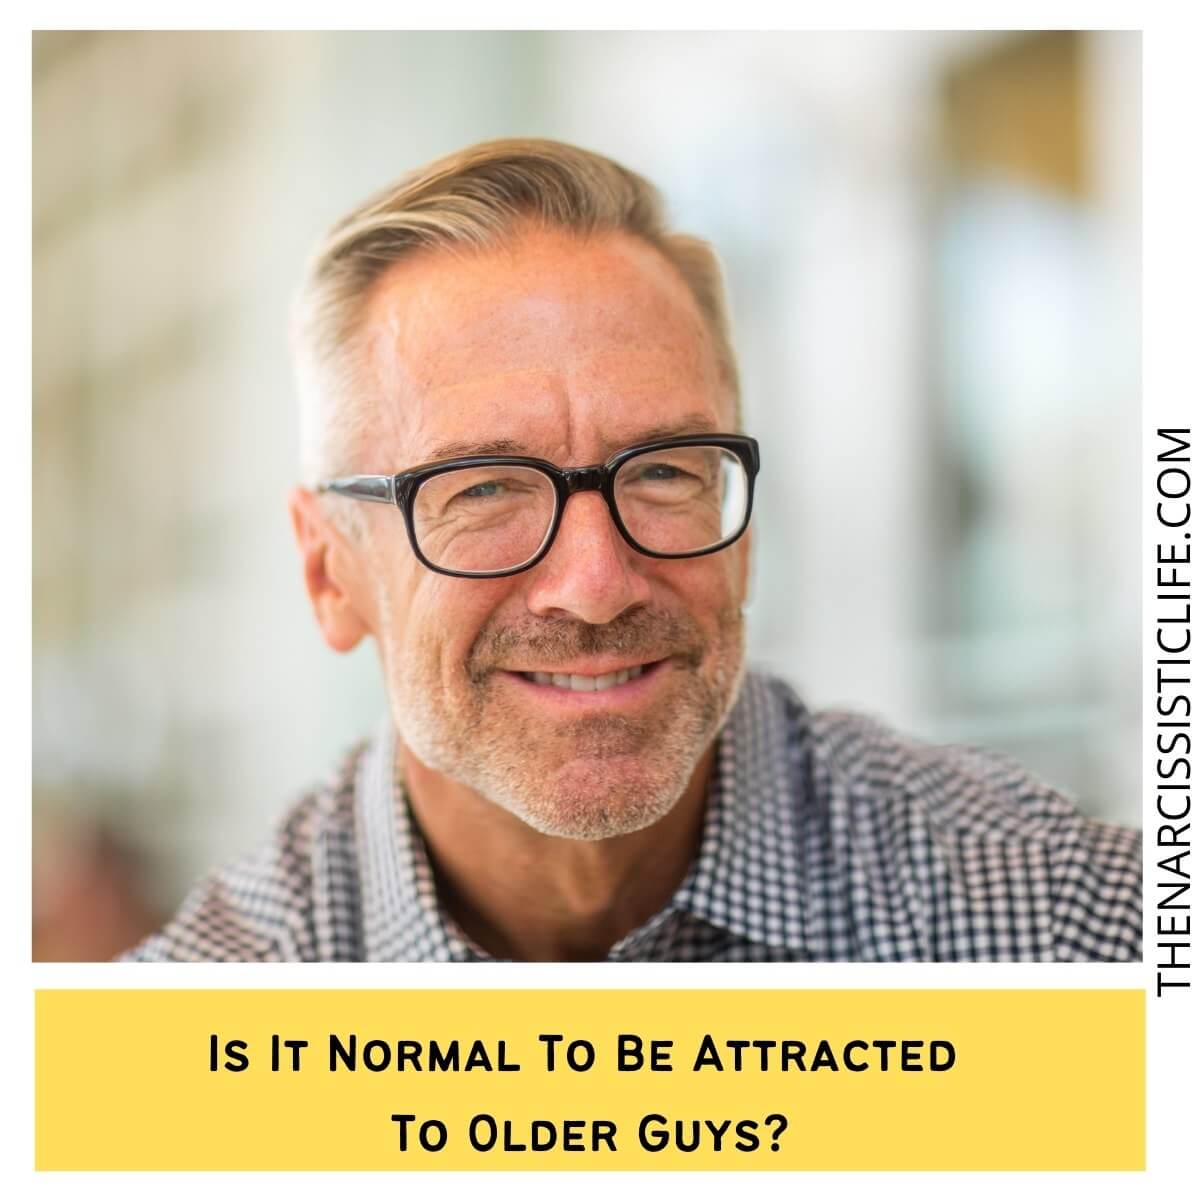 Why Am I Attracted To Older Men? 10 Reasons Why - The Narcissistic Life